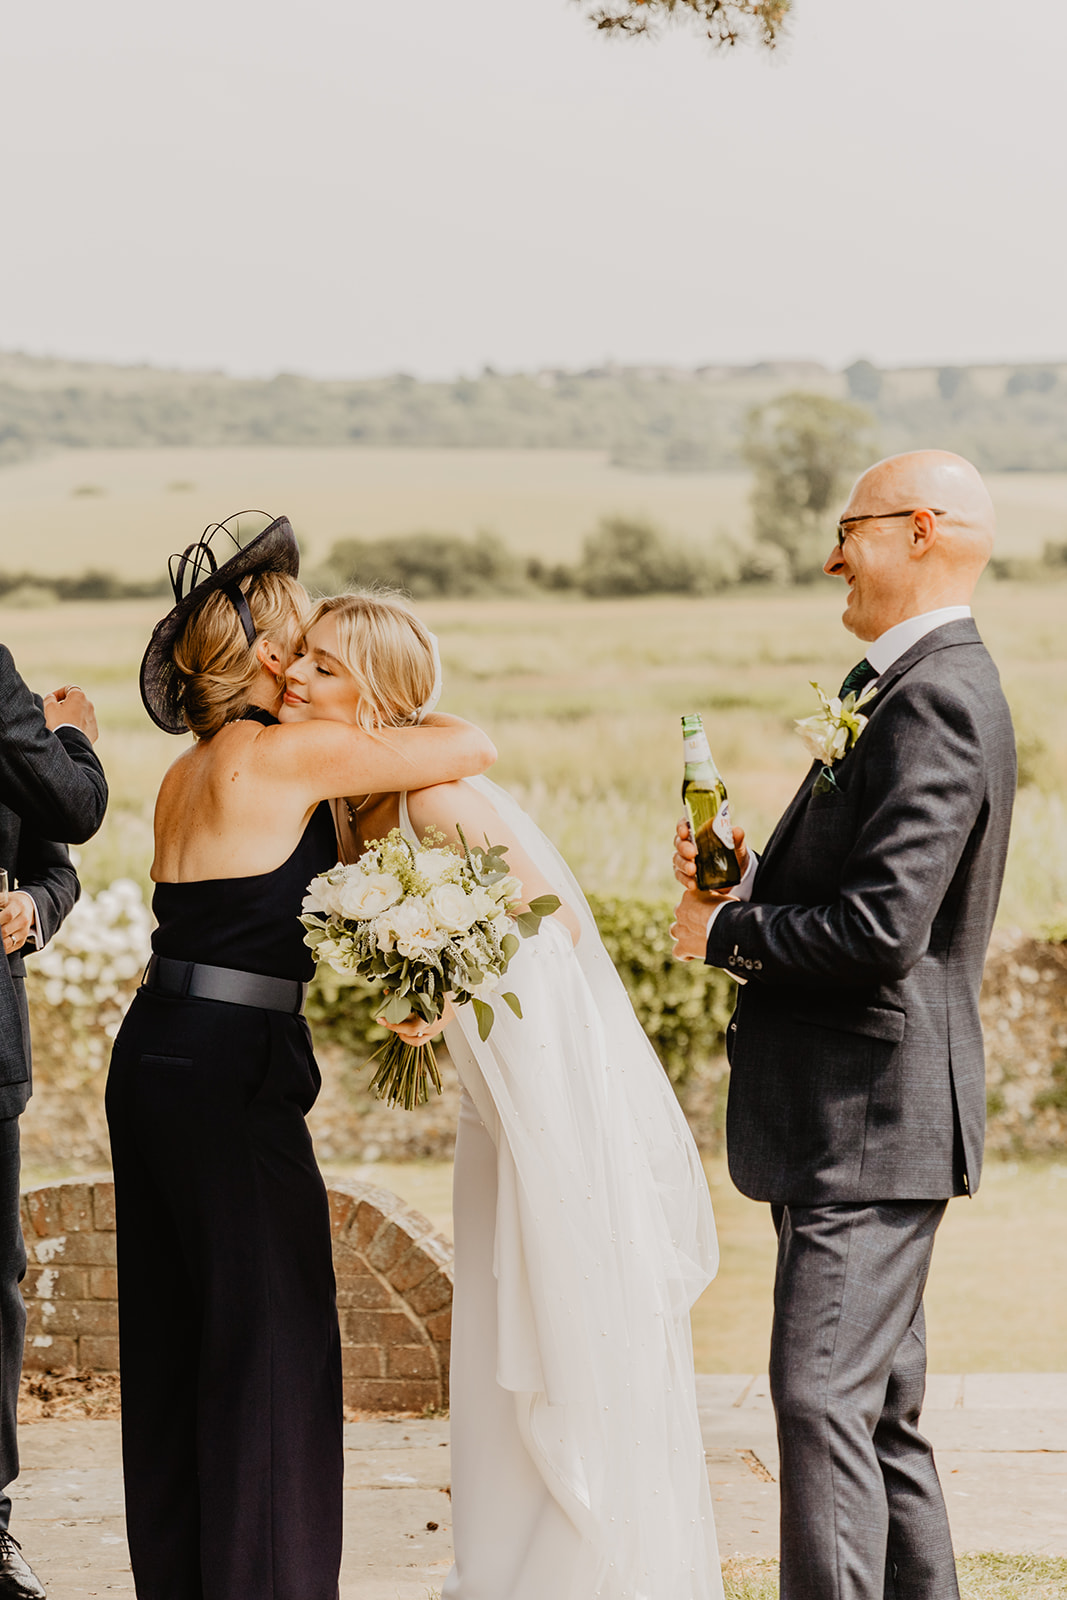 Family photos at a Bury Manor Barn Wedding in Sussex. Photographer OliveJoy Photography.